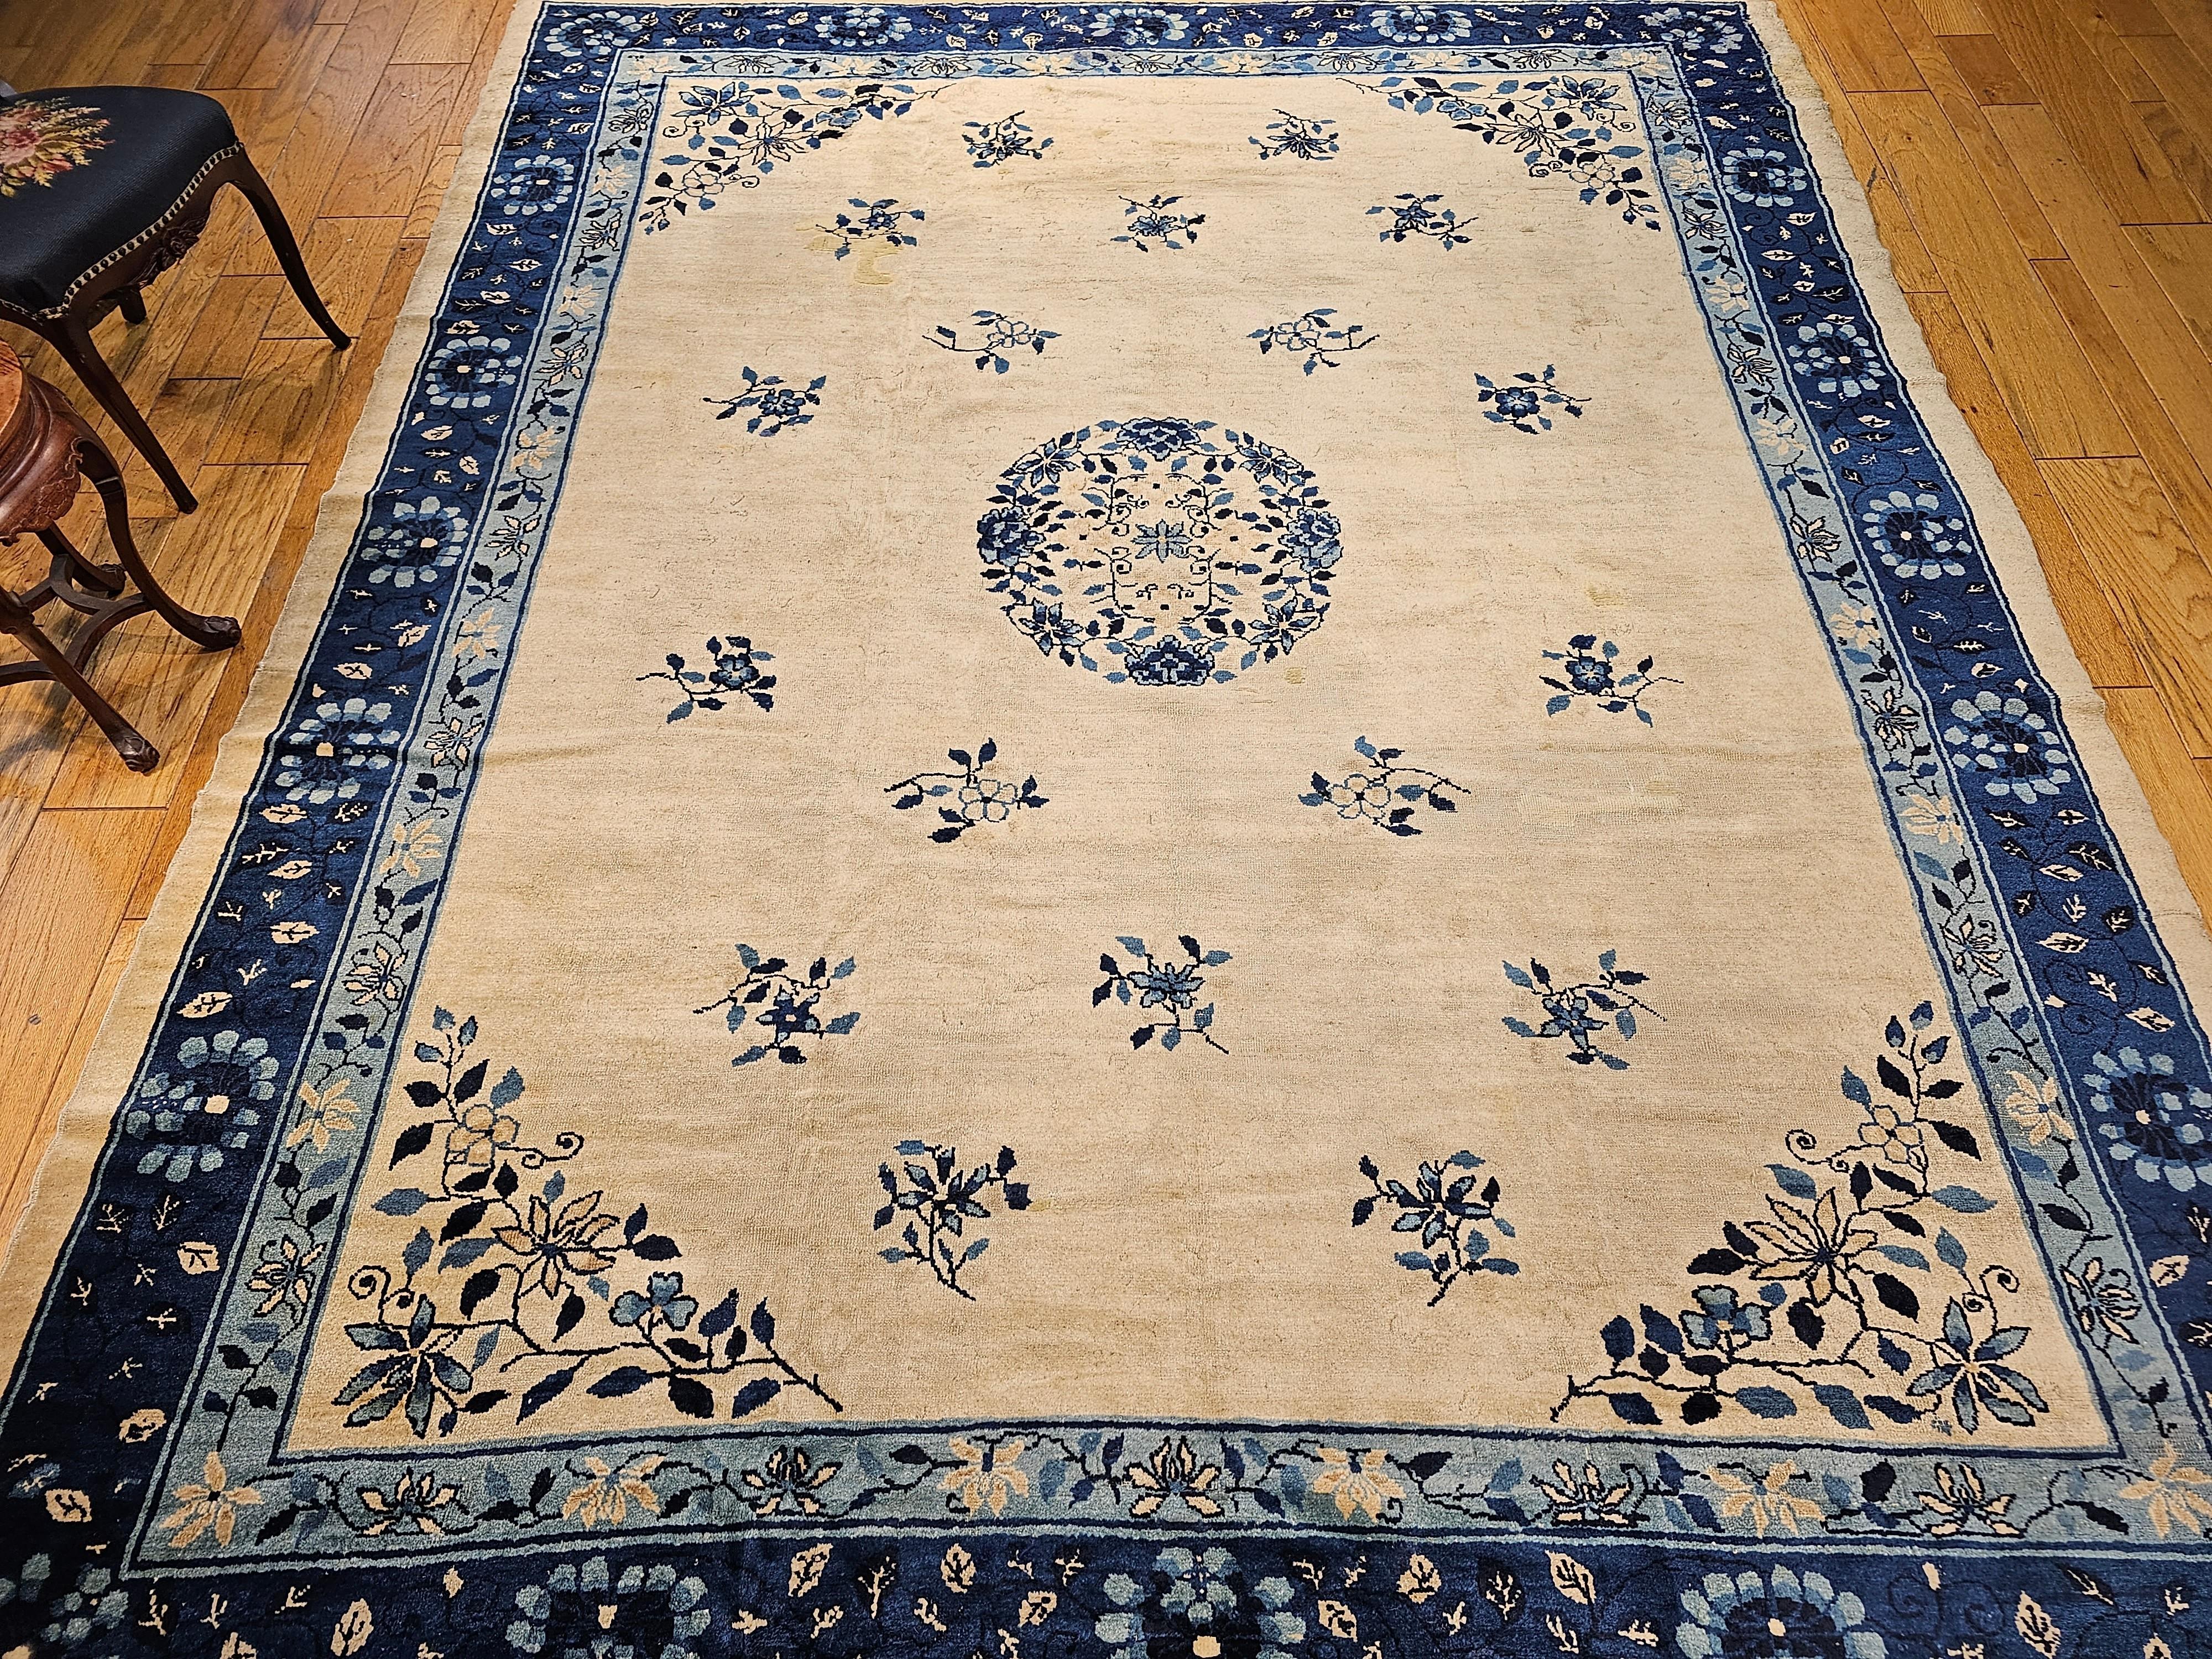 19th Century Room Size Chinese Peking Rug in Ivory, Navy, Baby Blue For Sale 11